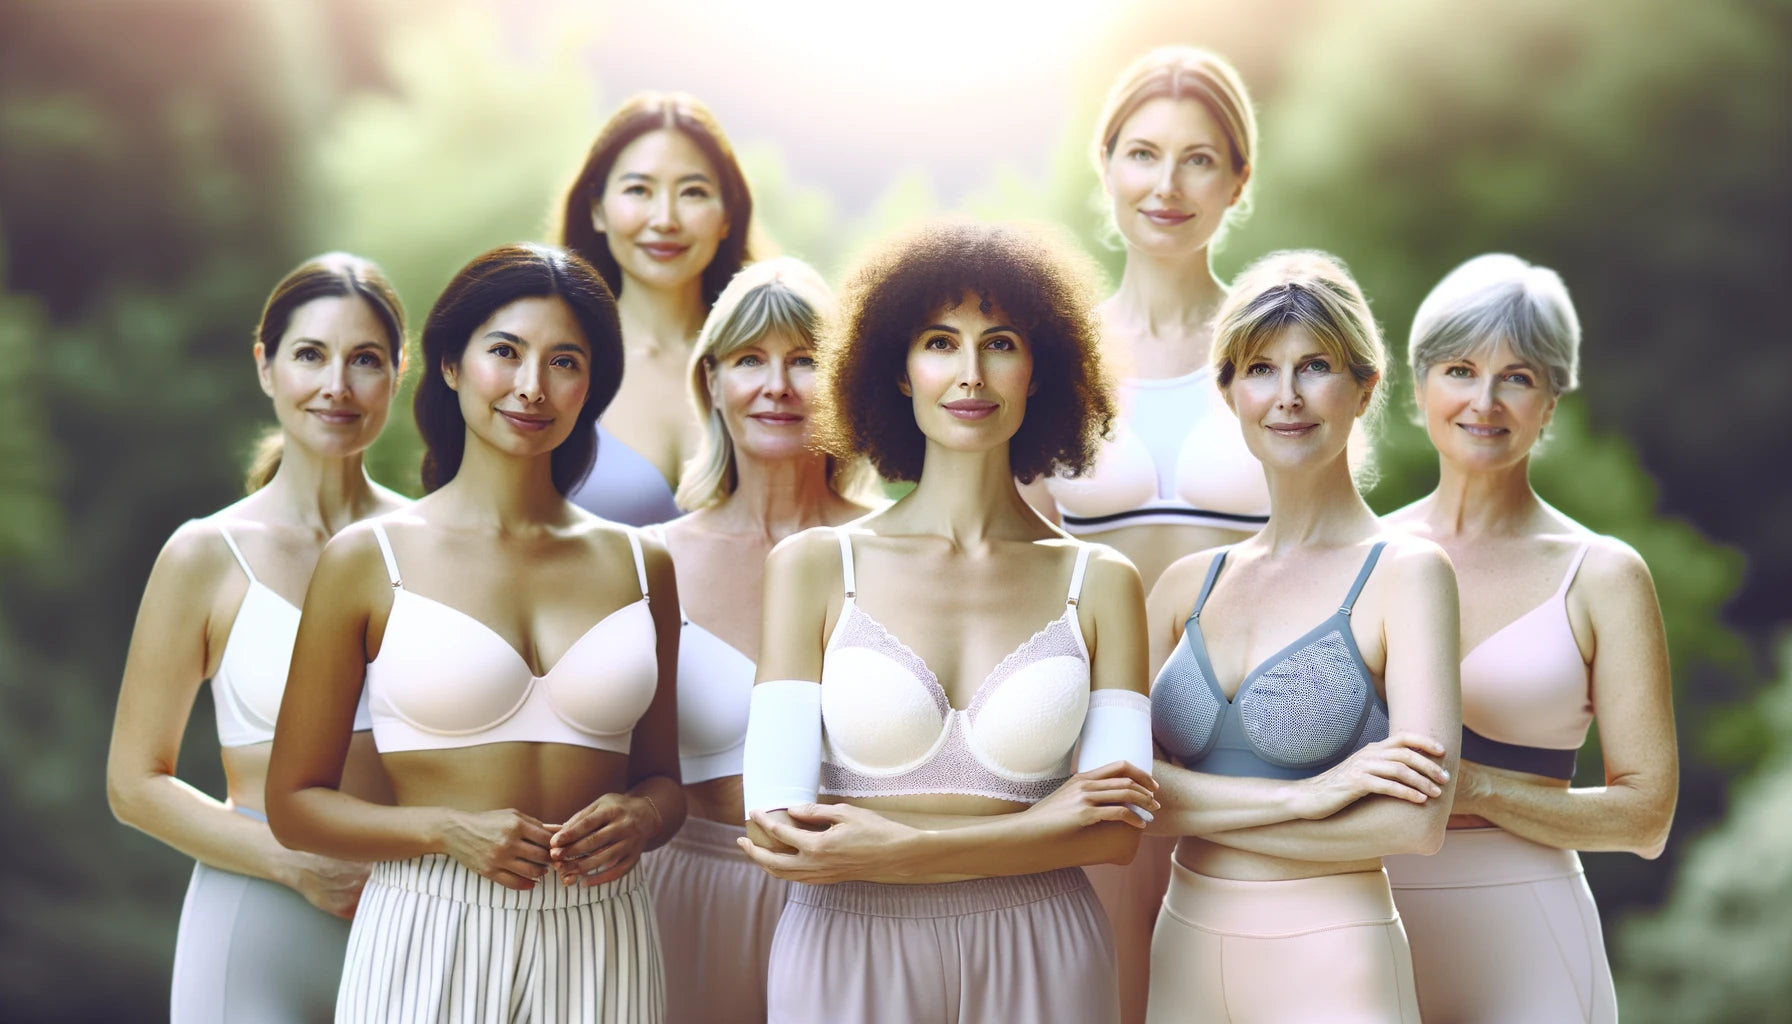 Group of women standing outside in just their bras.